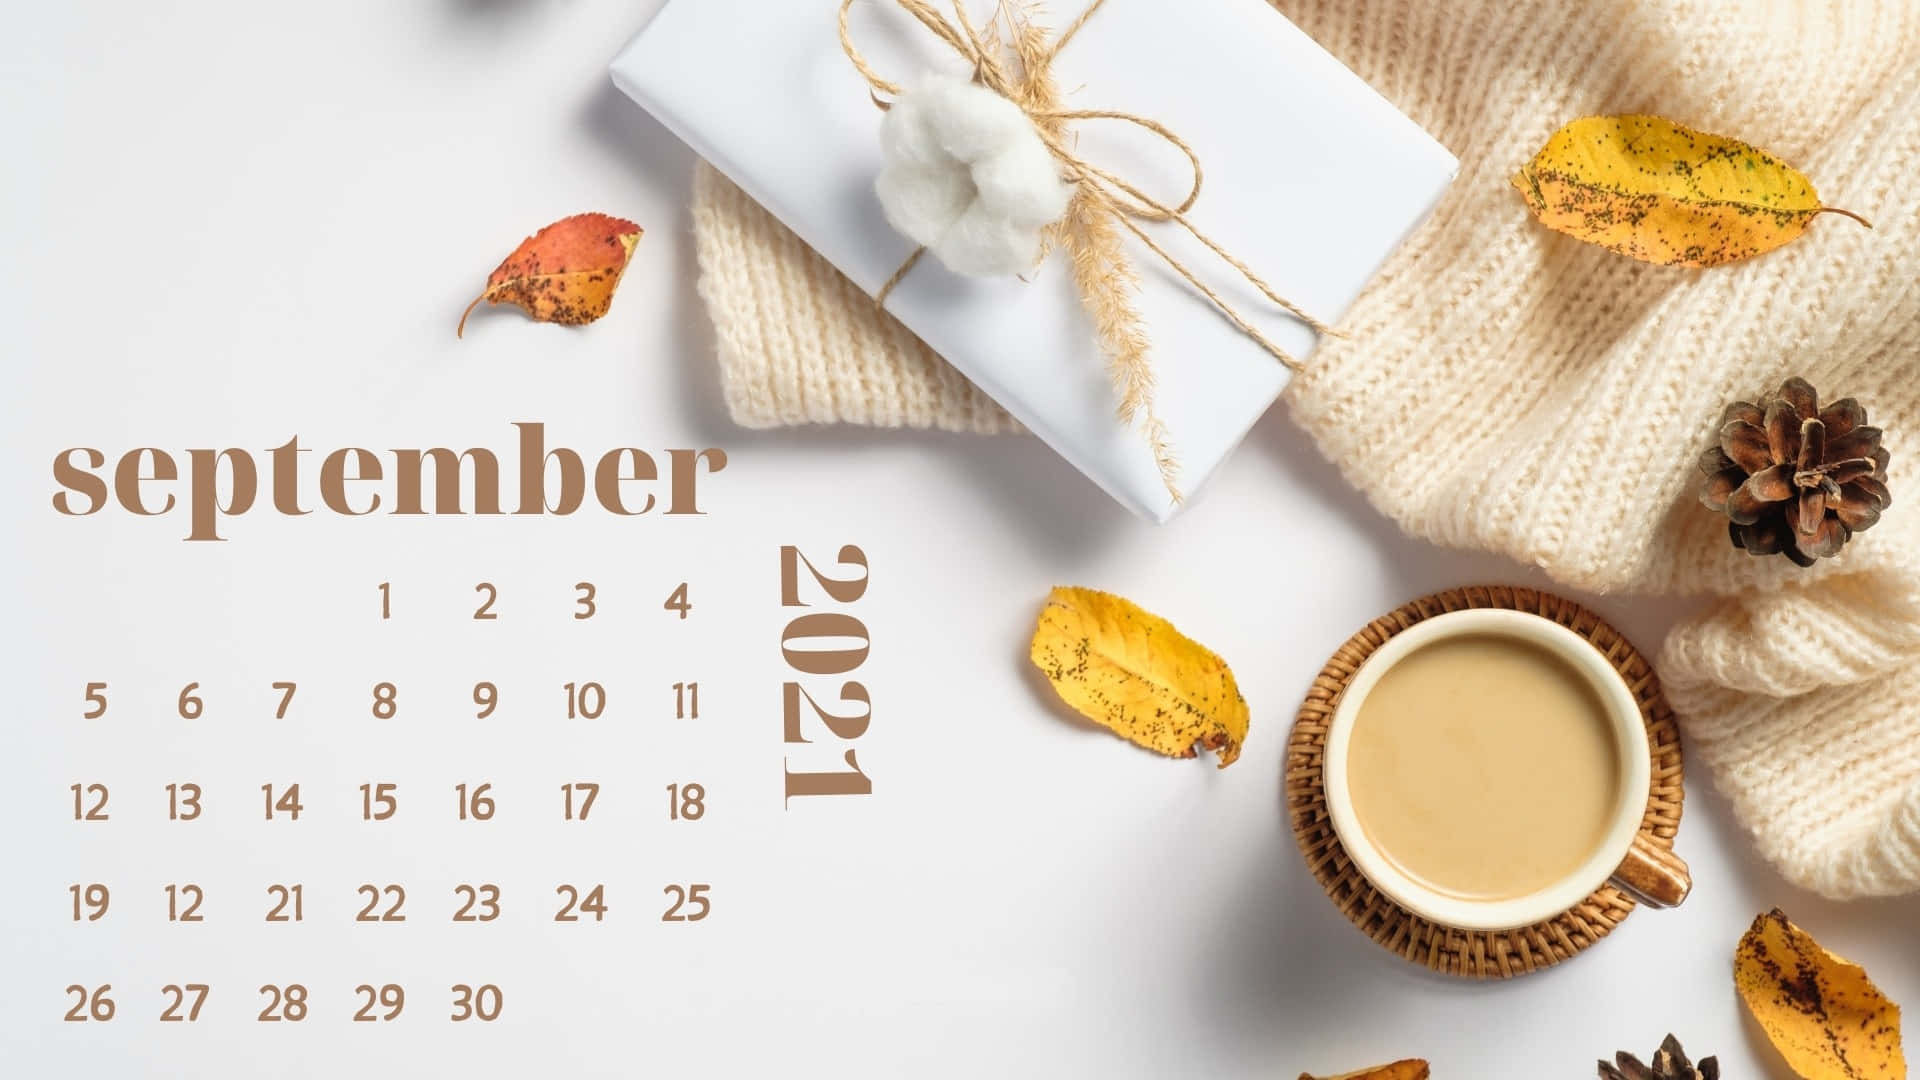 September 2020 Calendar With A Cup Of Coffee And Autumn Leaves Wallpaper